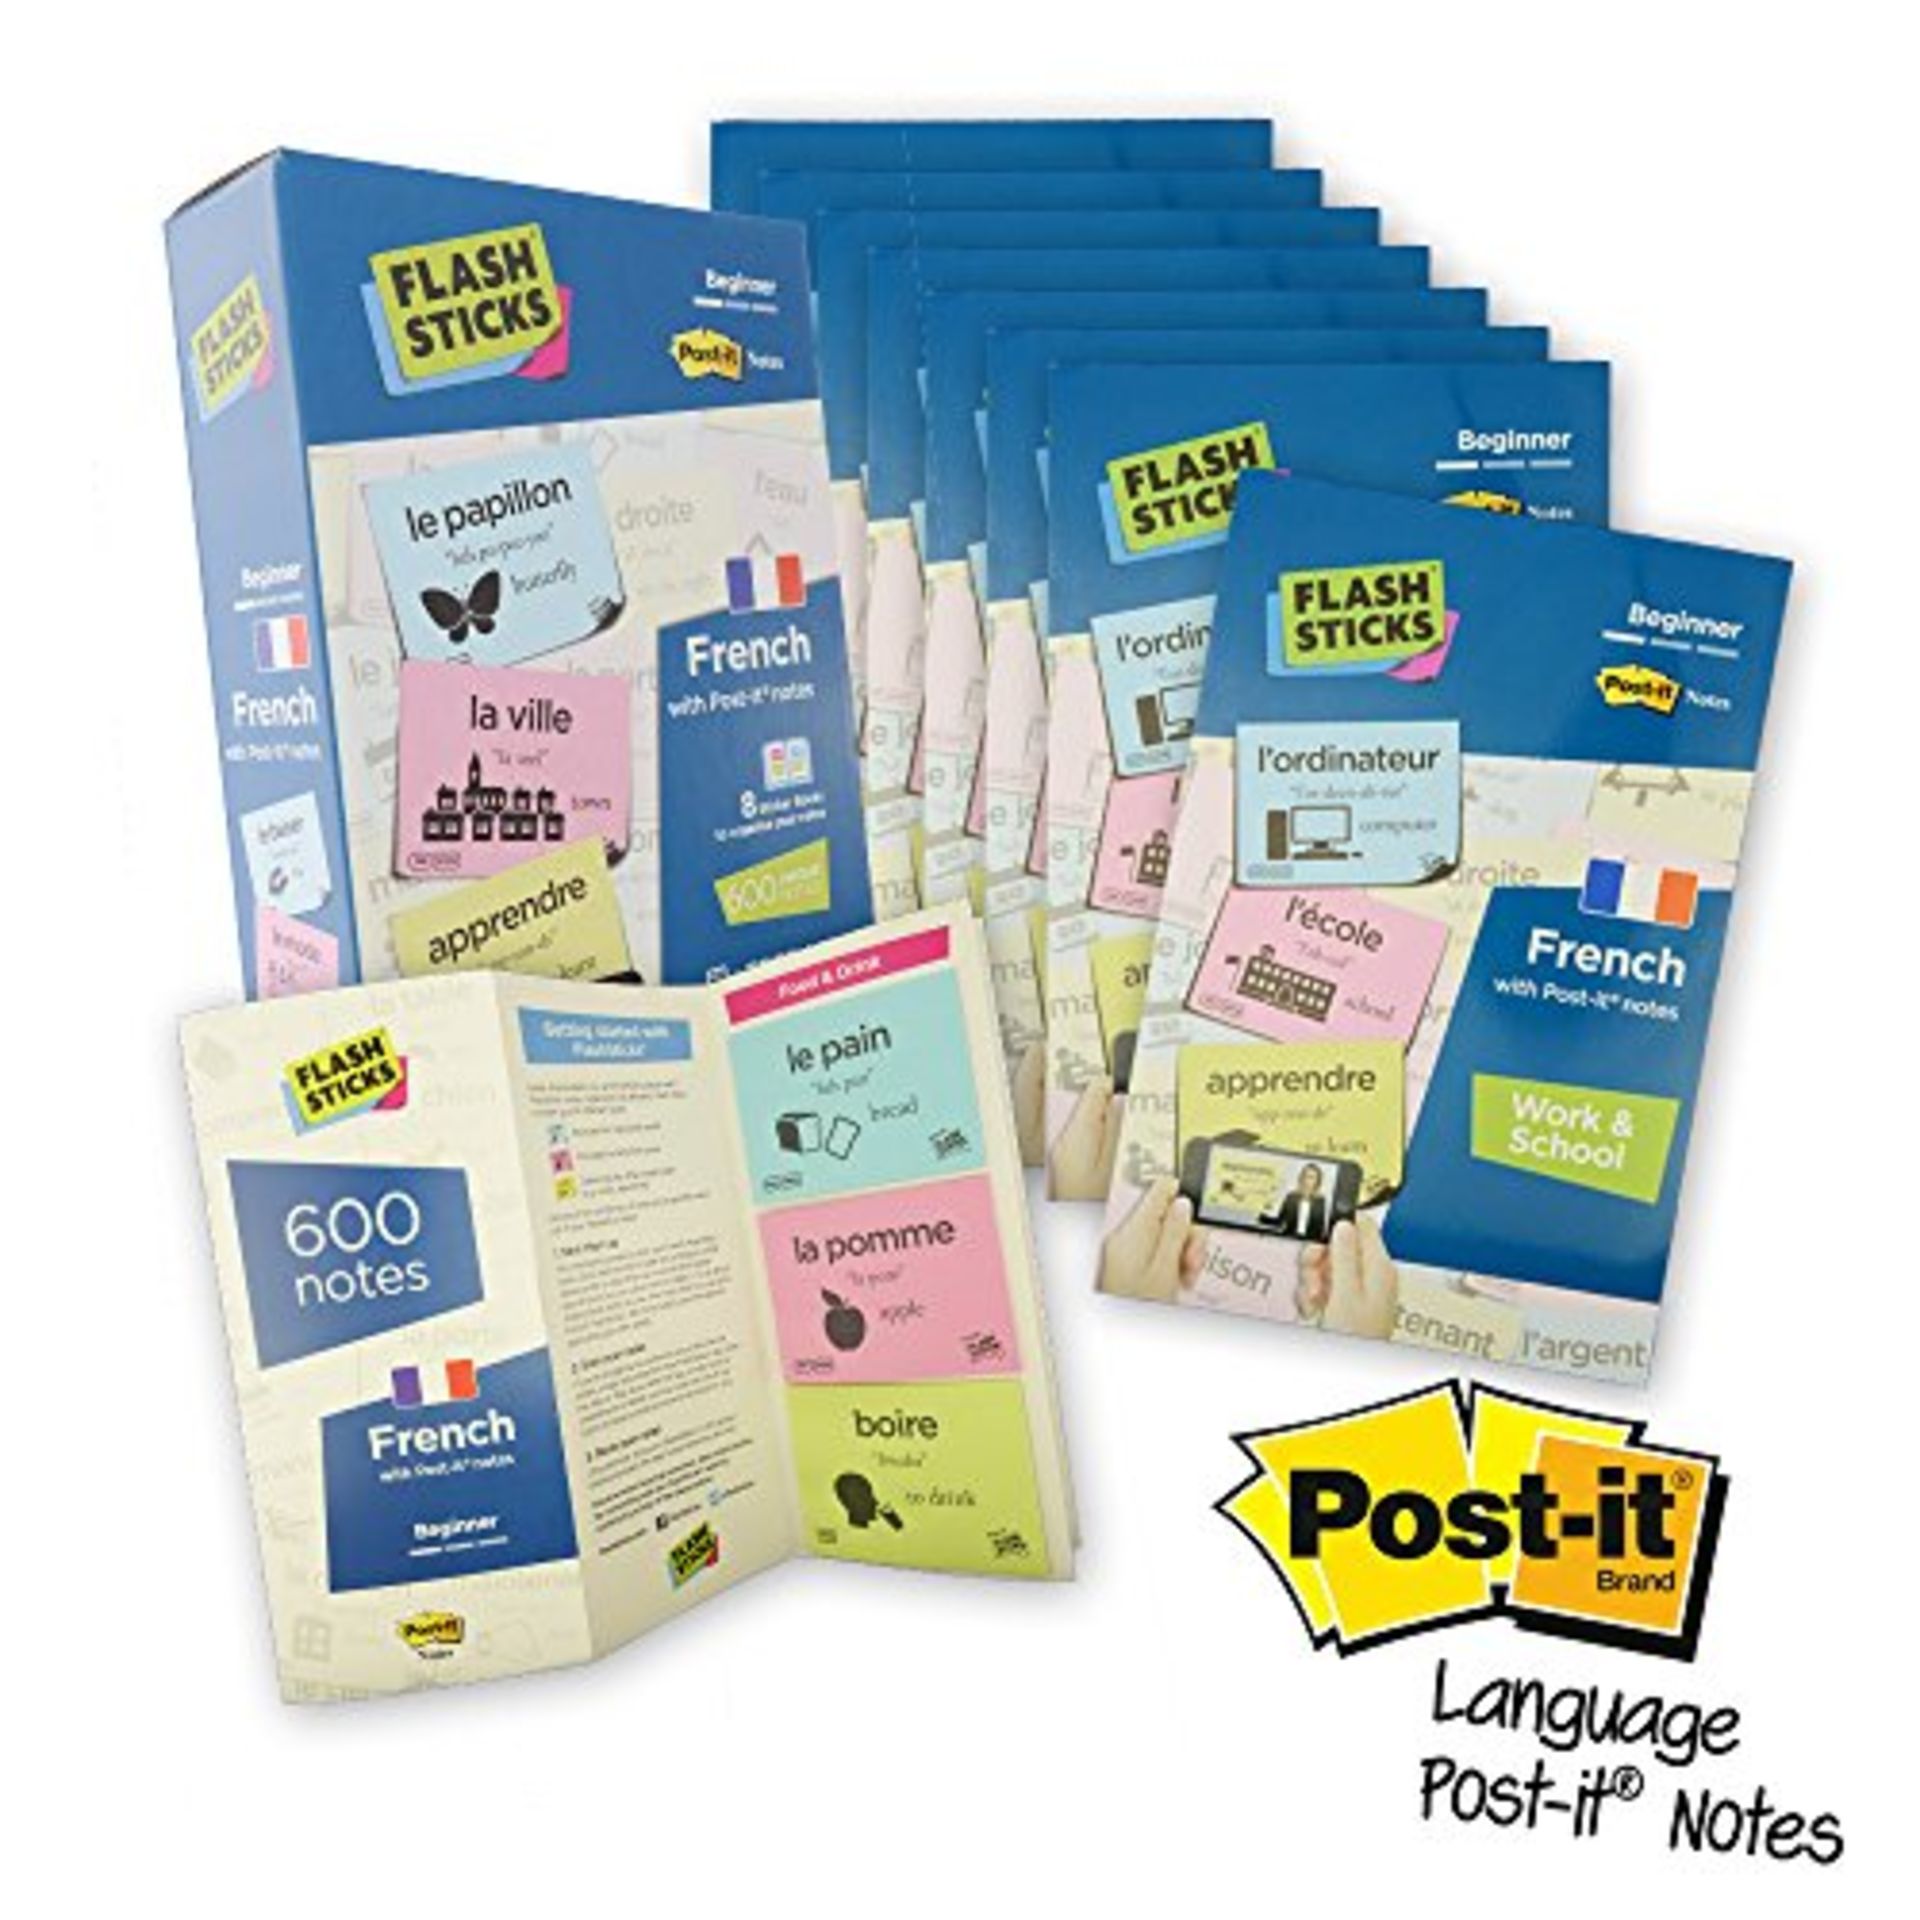 Brand New Post It Keystage 1-2 Adult A1-A2 Flash Sticks French With Sticky Notes ISP £45.28 (Ebay)